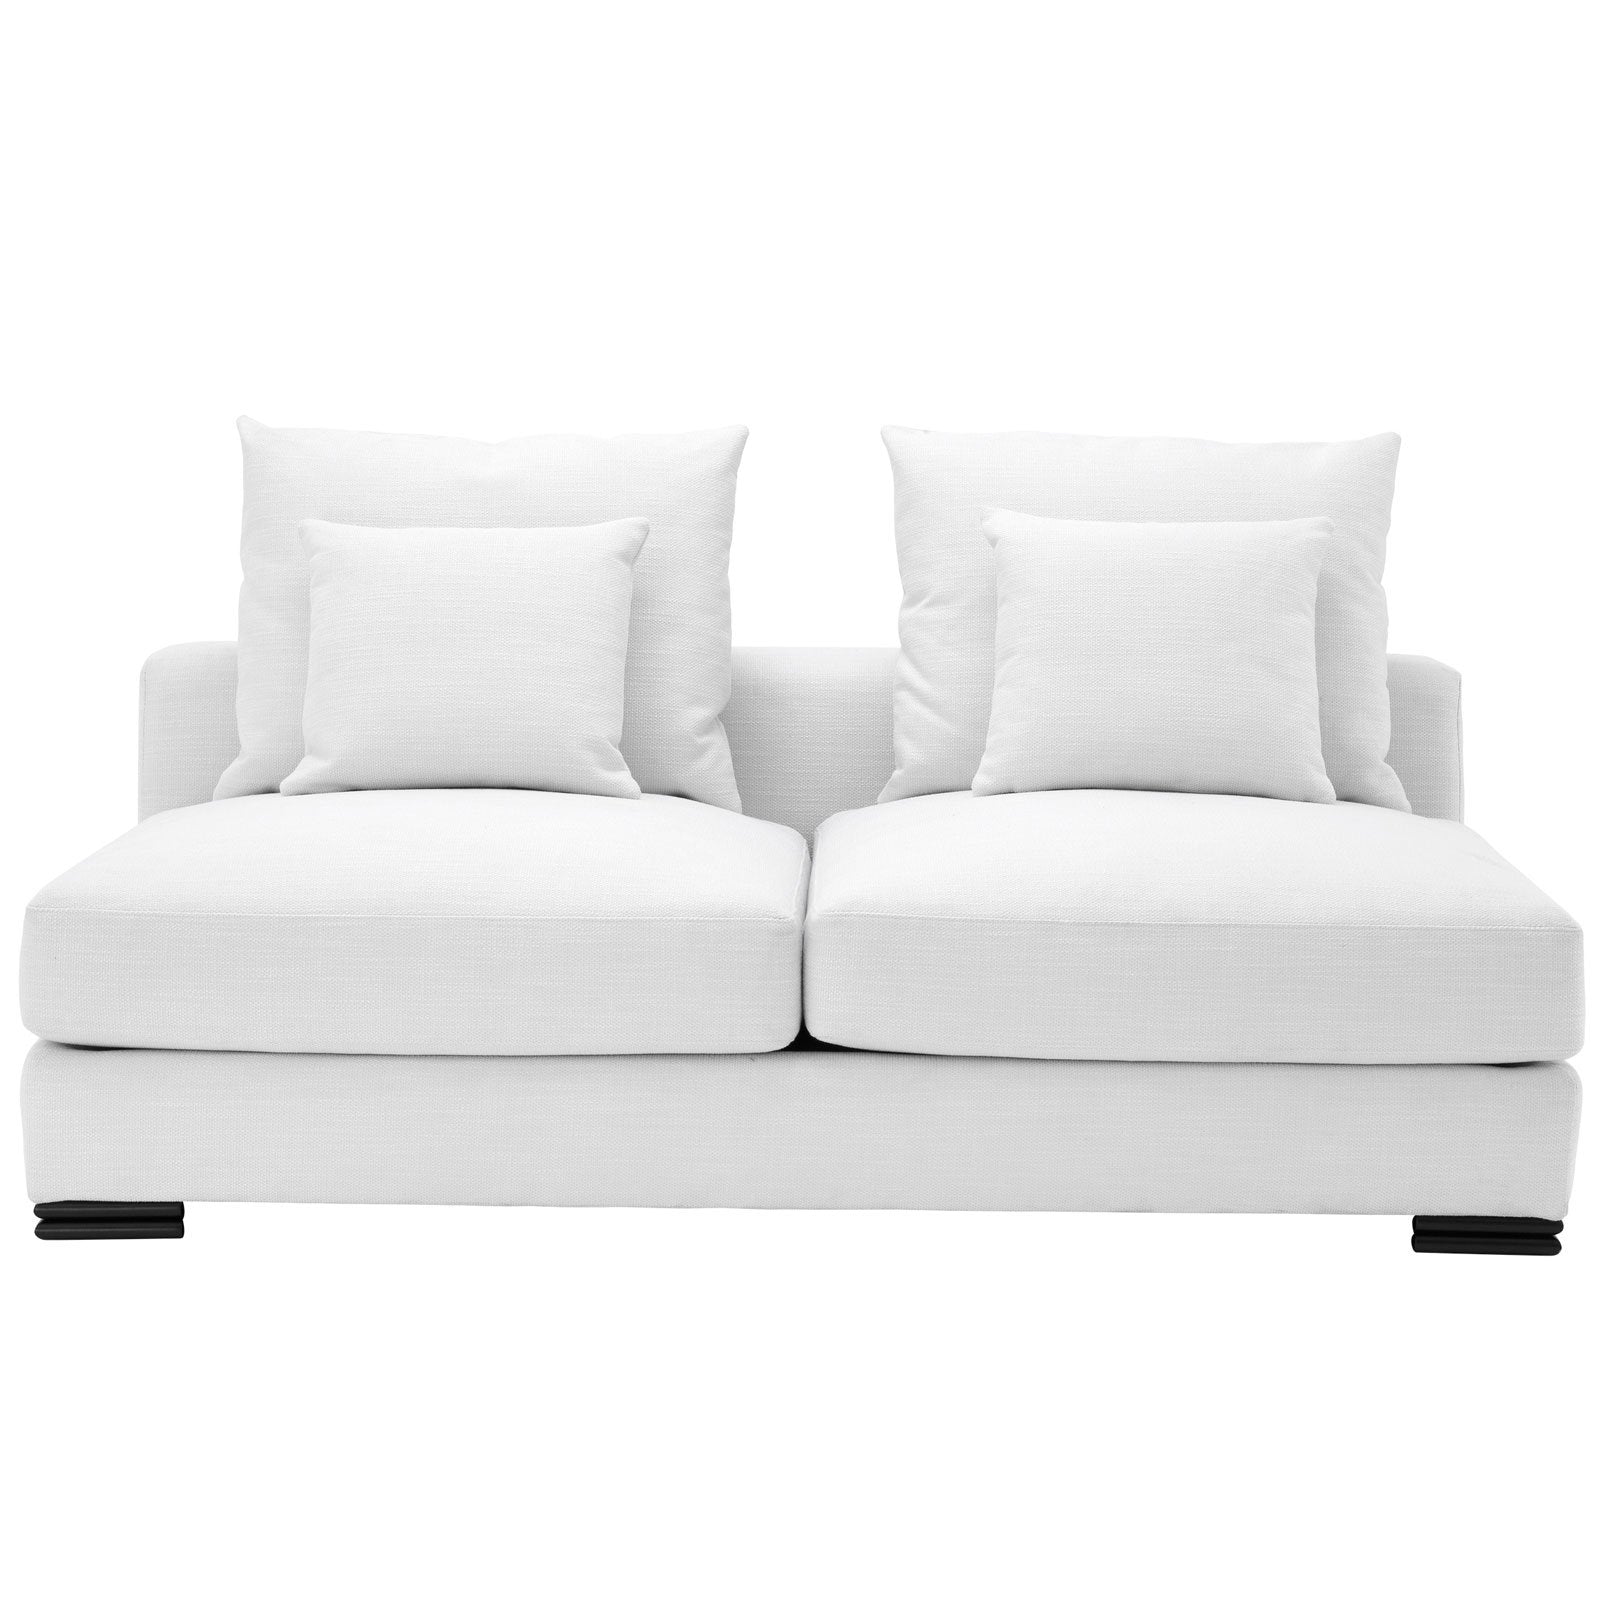 Refilling your Sofa Cushions? A Guide - The Cushion Guys